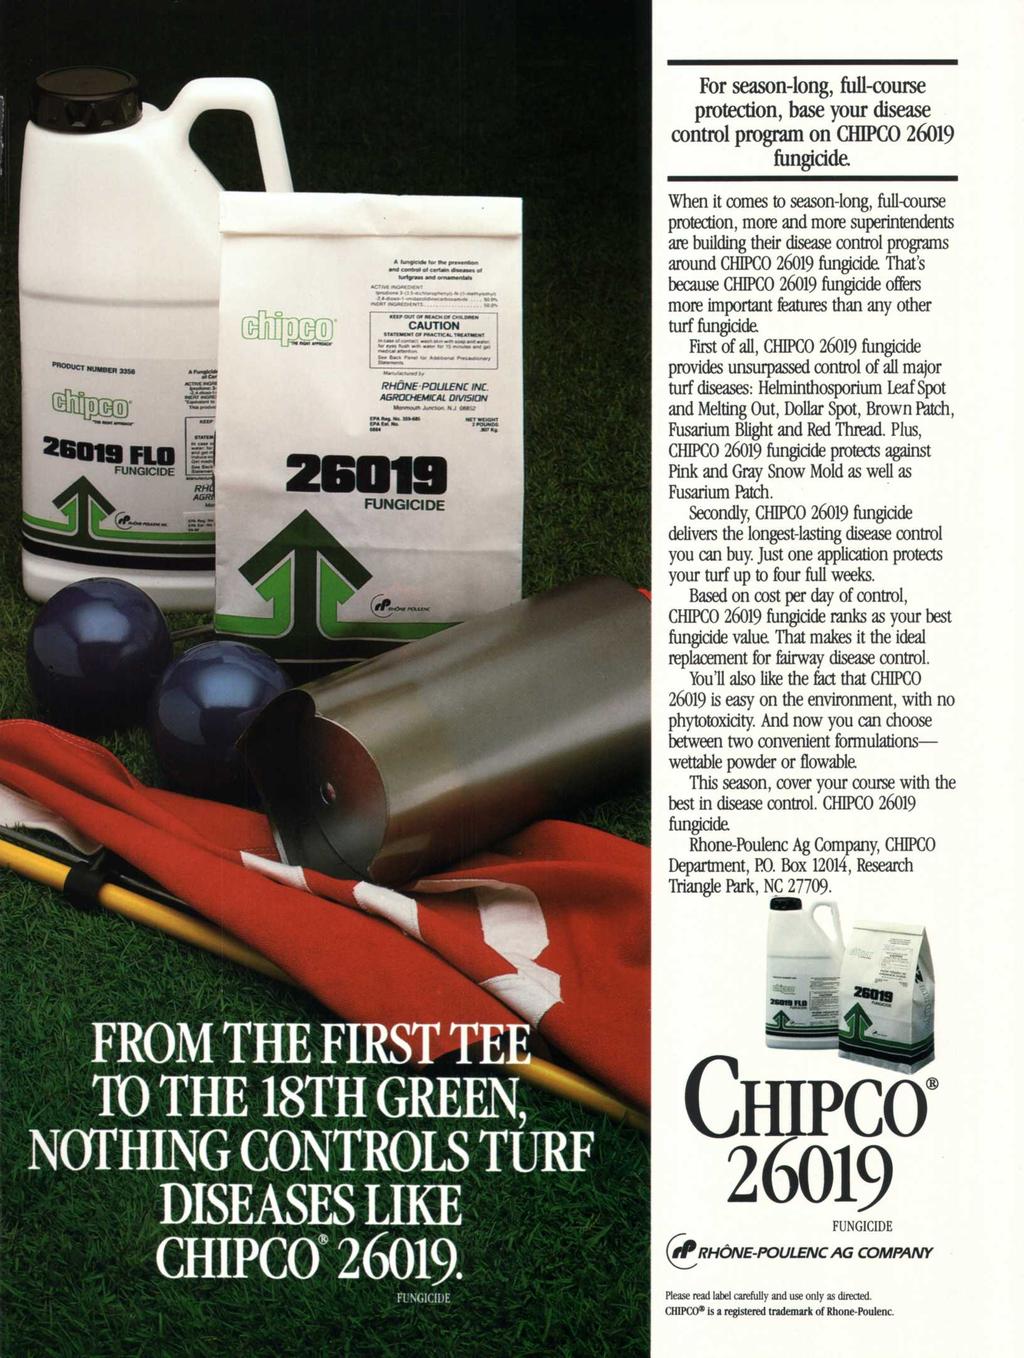 For season-long, full-course protection, base your disease control program on CHIPCO 26019 fungicide.